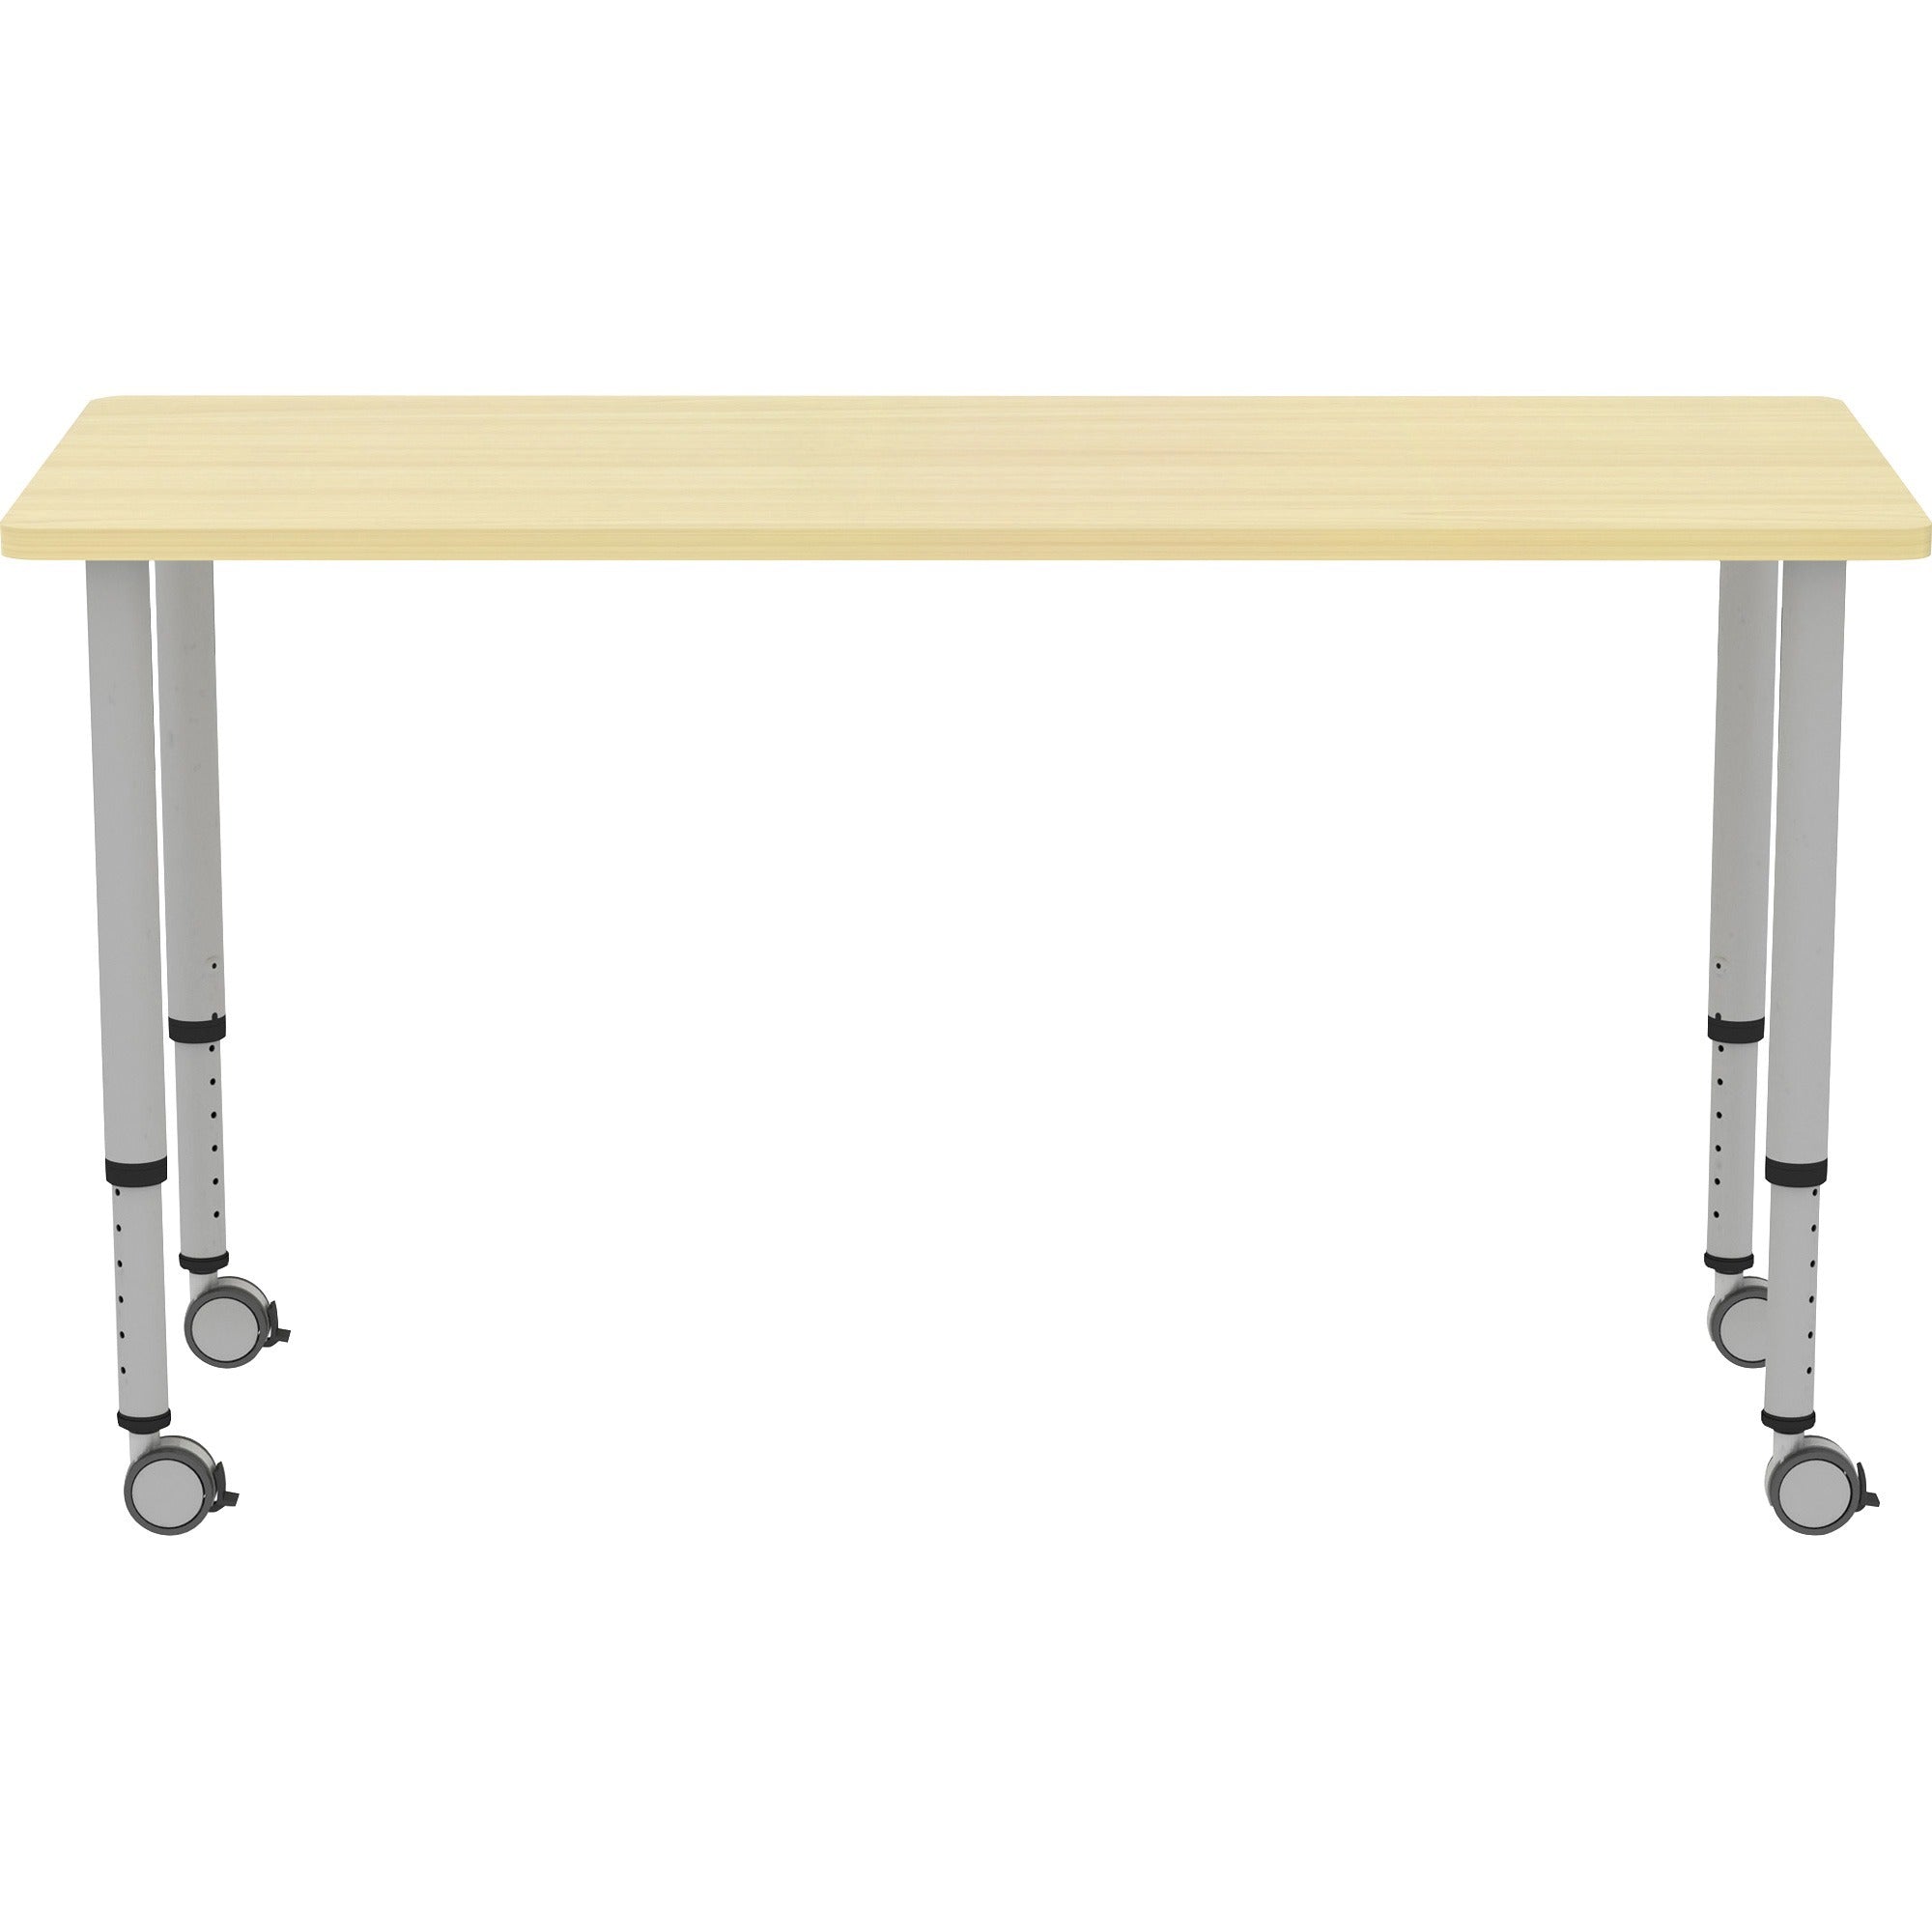 lorell-attune-height-adjustable-multipurpose-rectangular-table-for-table-toprectangle-top-adjustable-height-2662-to-3362-adjustment-x-60-table-top-width-x-2362-table-top-depth-3362-height-assembly-required-laminated-maple-la_llr69580 - 3